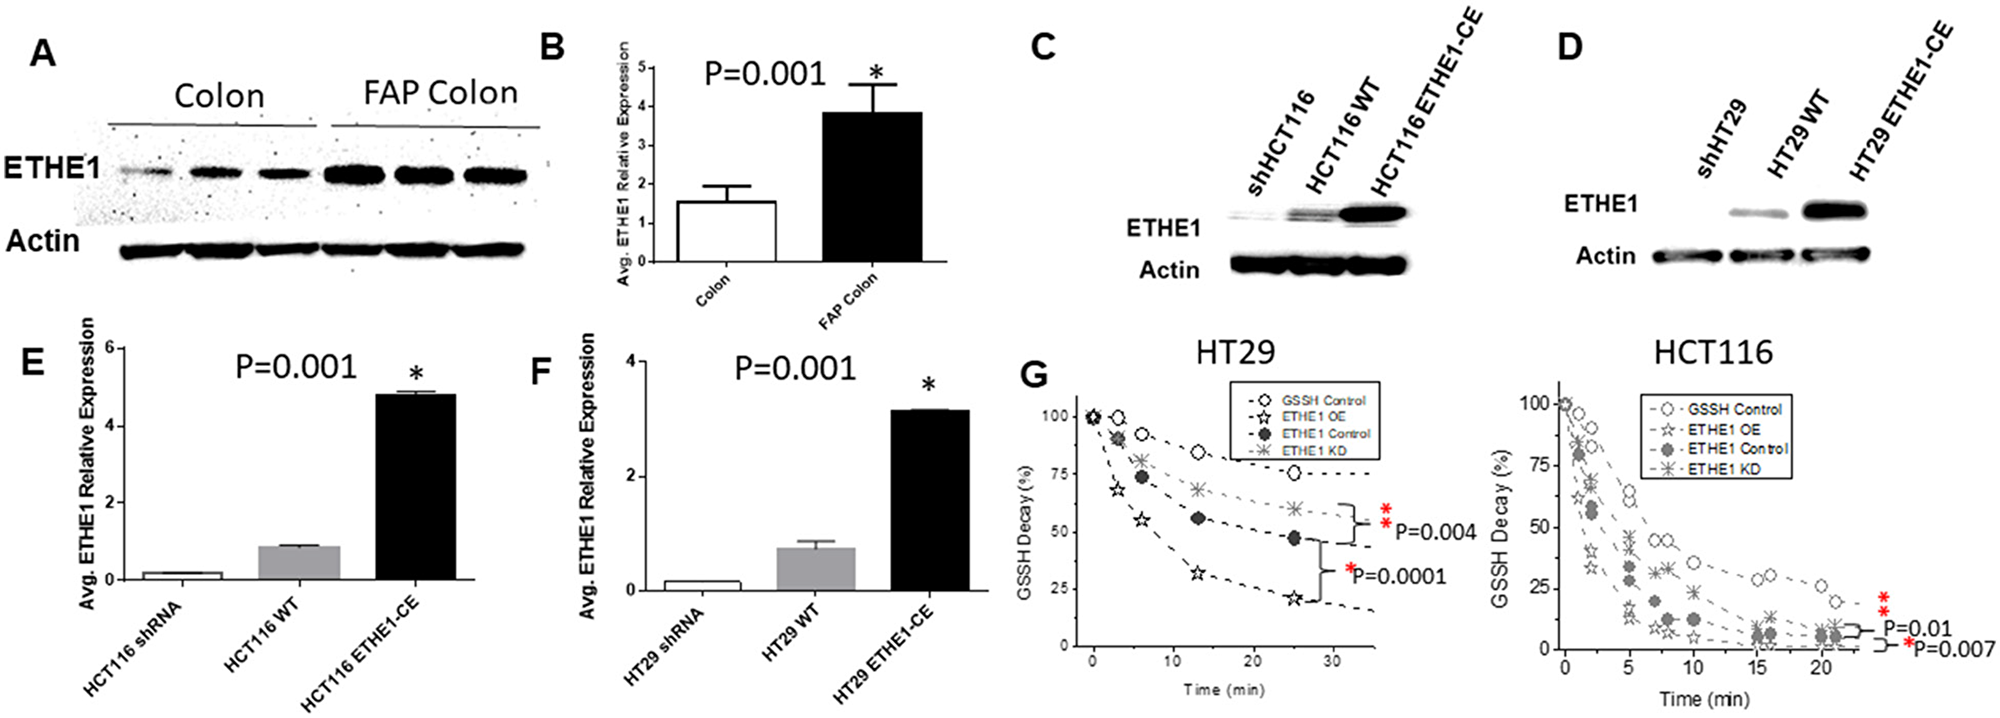 Increased ETHE1 expression and Activity in FAP and CRC.